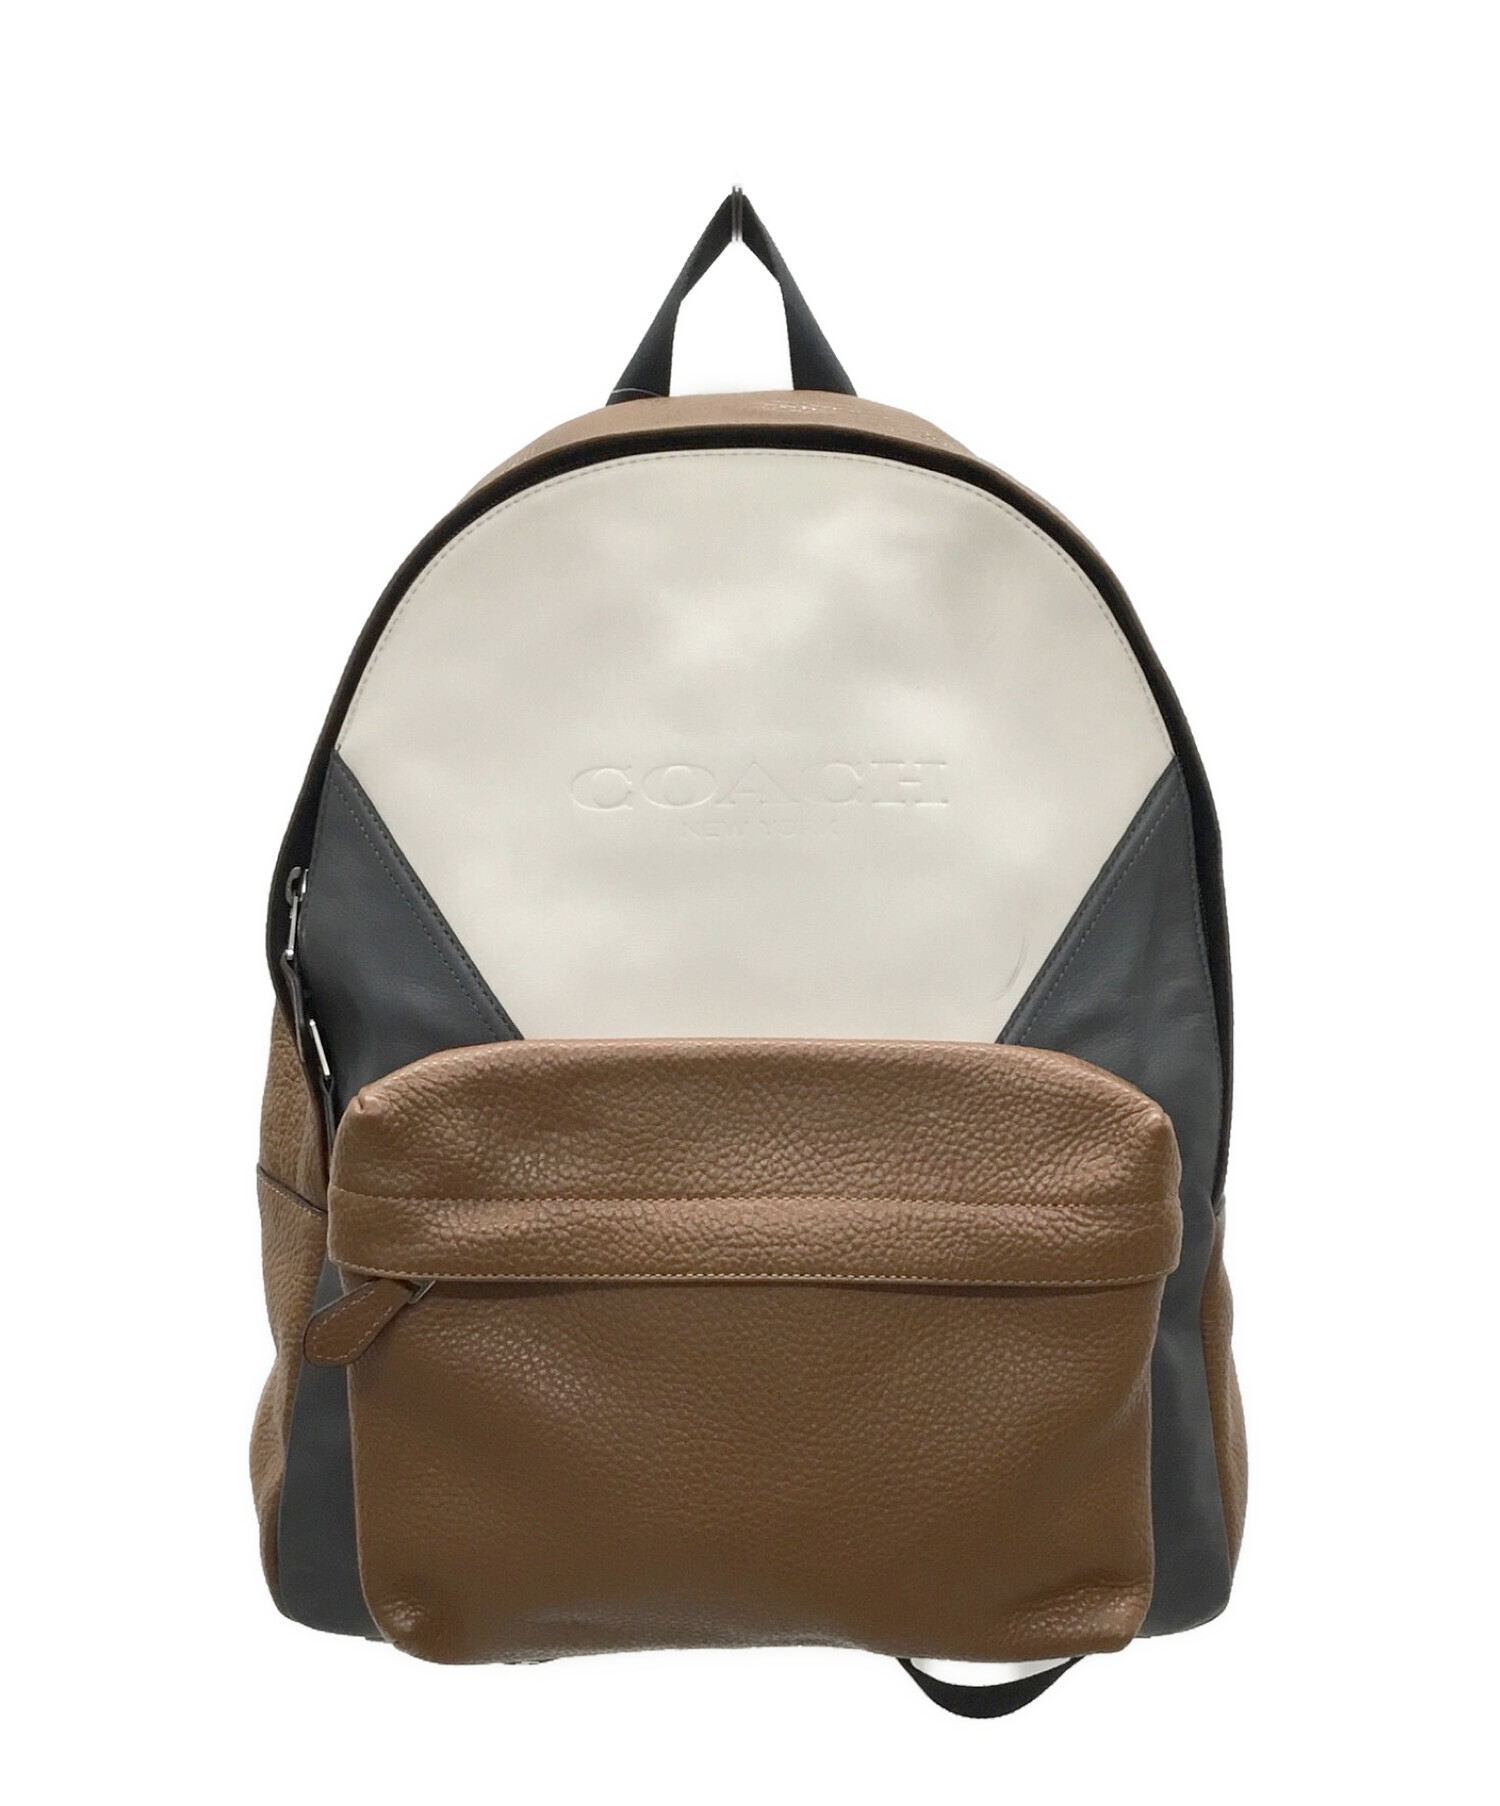 COACH コーチ リュック F71674 CAMPUS BACKPACK